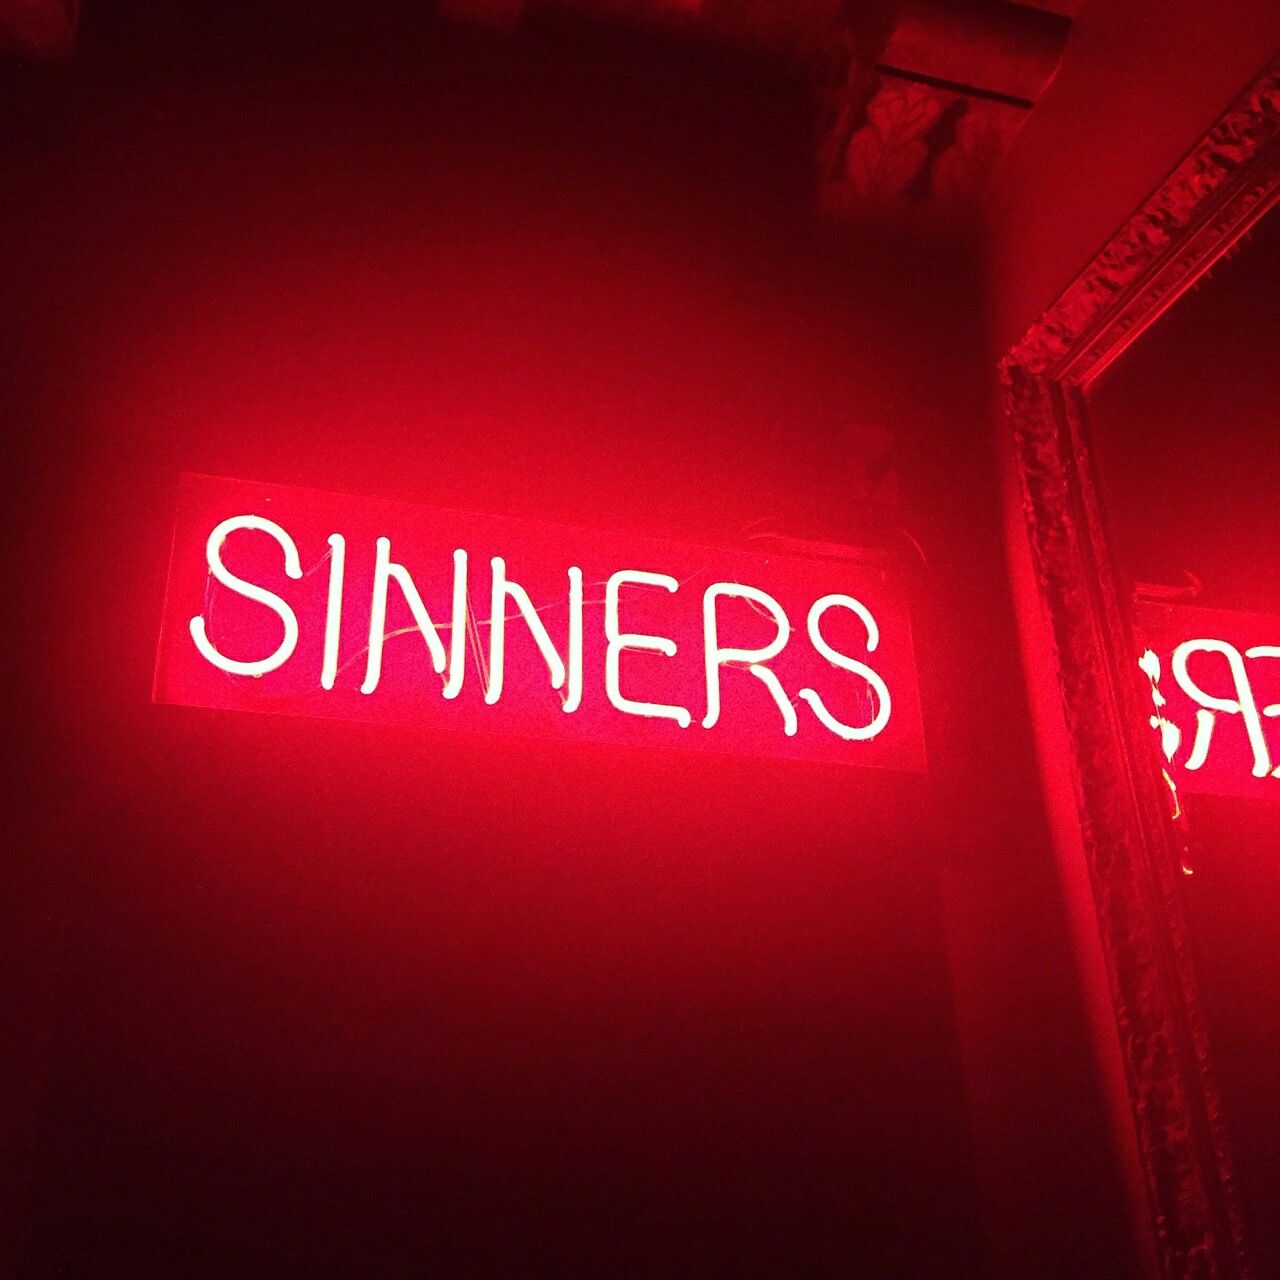 Sinners LED Neon Sign